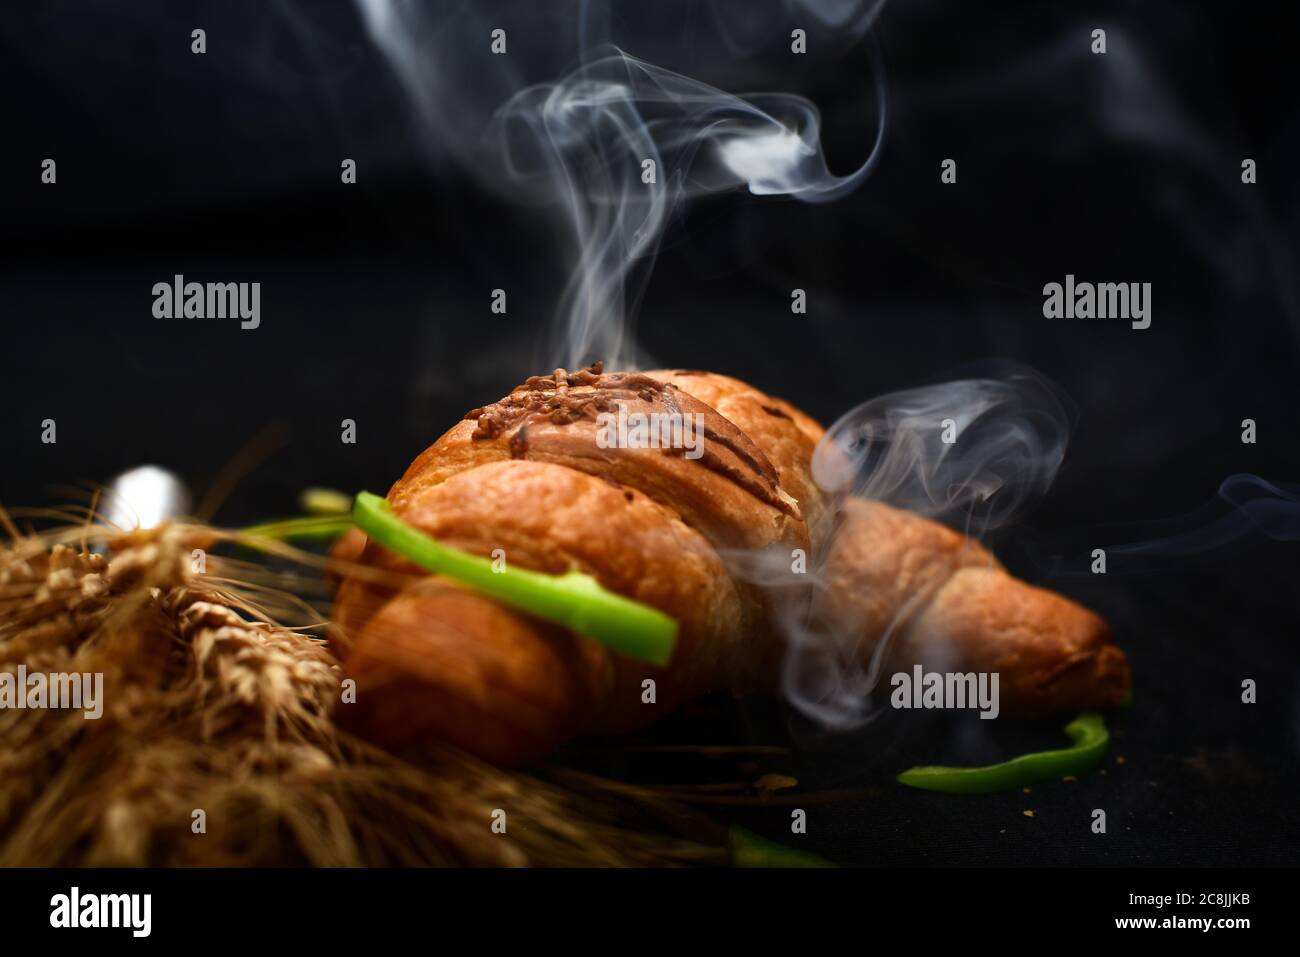 hot chilli wheat bread with steam on black background.Food background and wallpapers Stock Photo